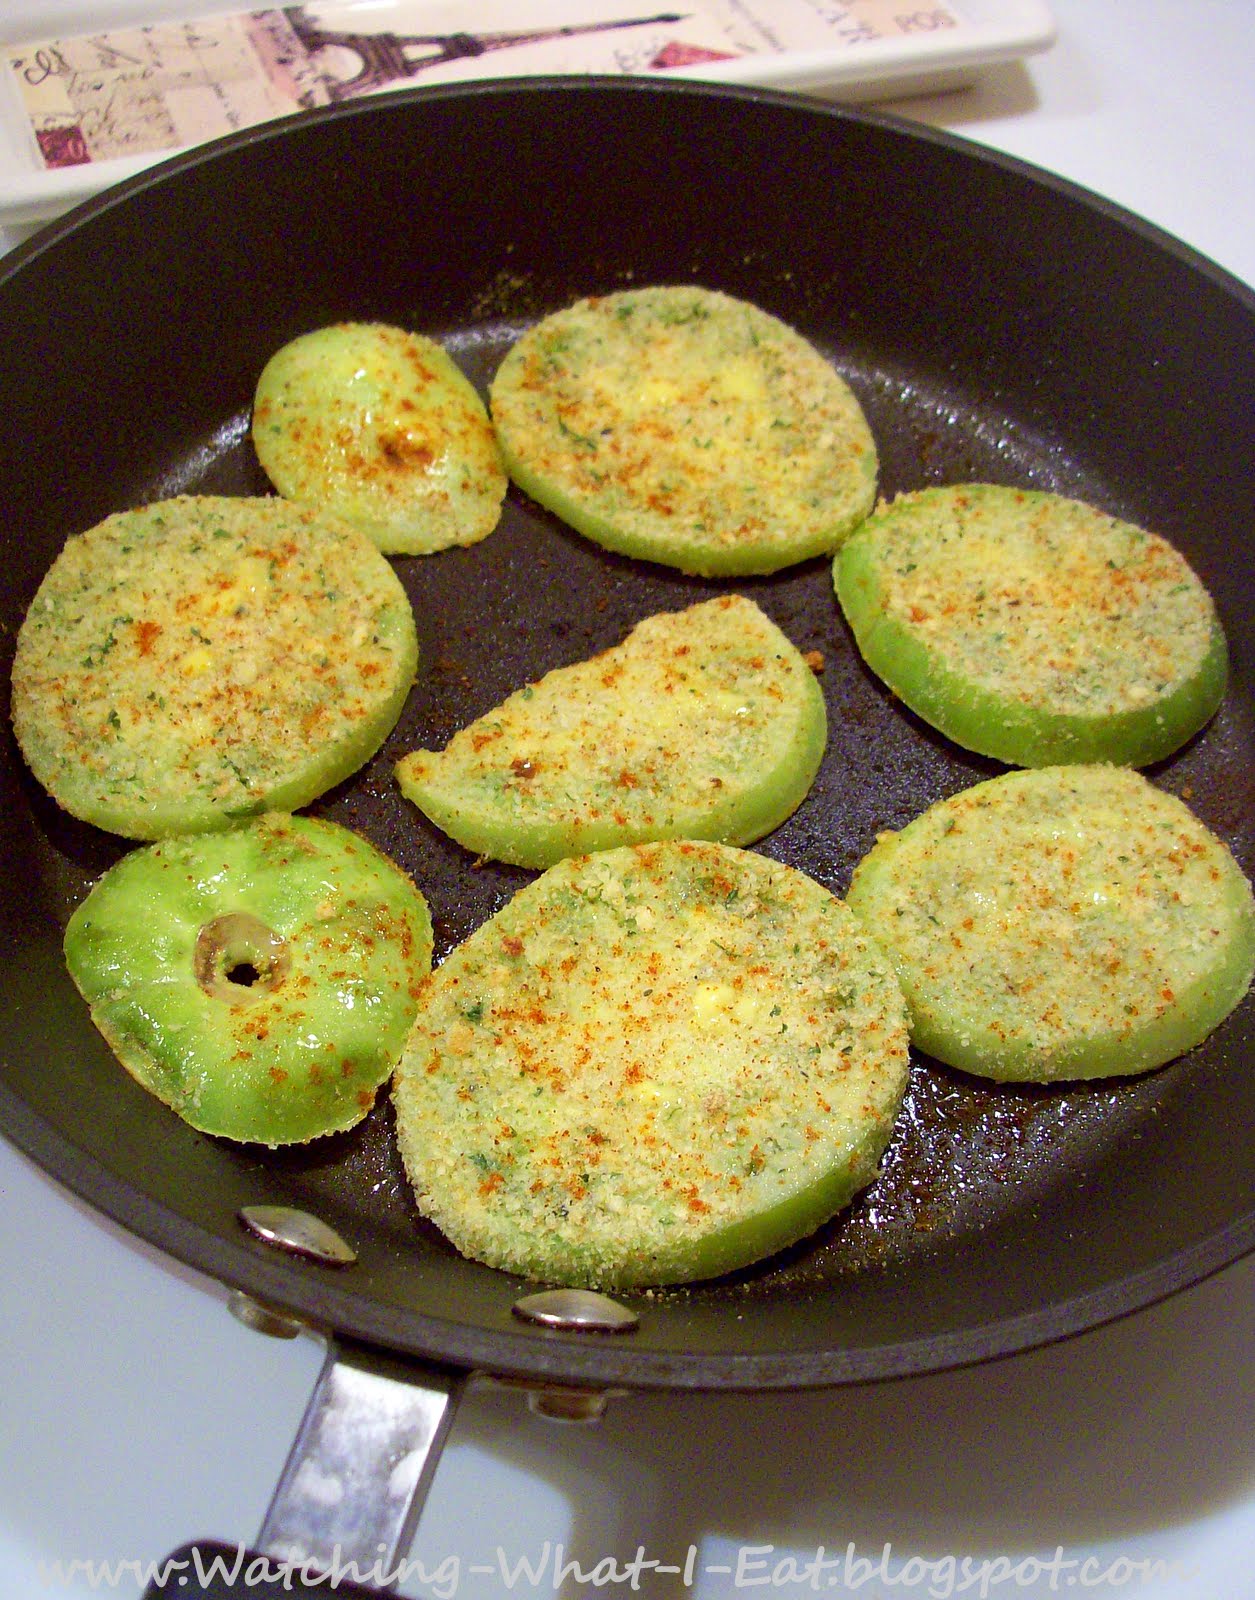 Watching What I Eat: Low-Fat 'Fried' Green Tomatoes ~ Meatless Monday